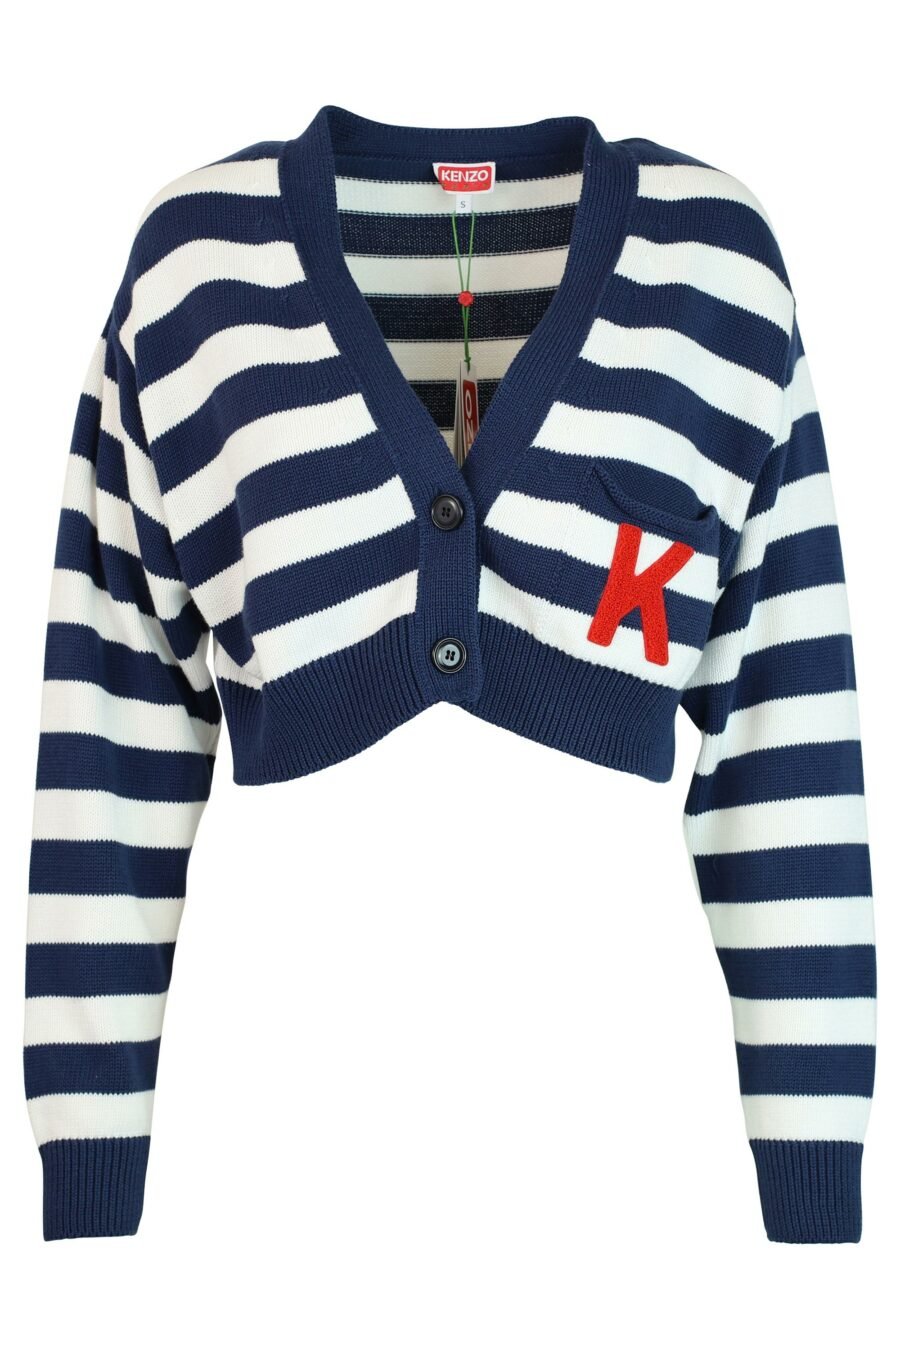 Blue striped short open jumper with red logo - 3612230443891